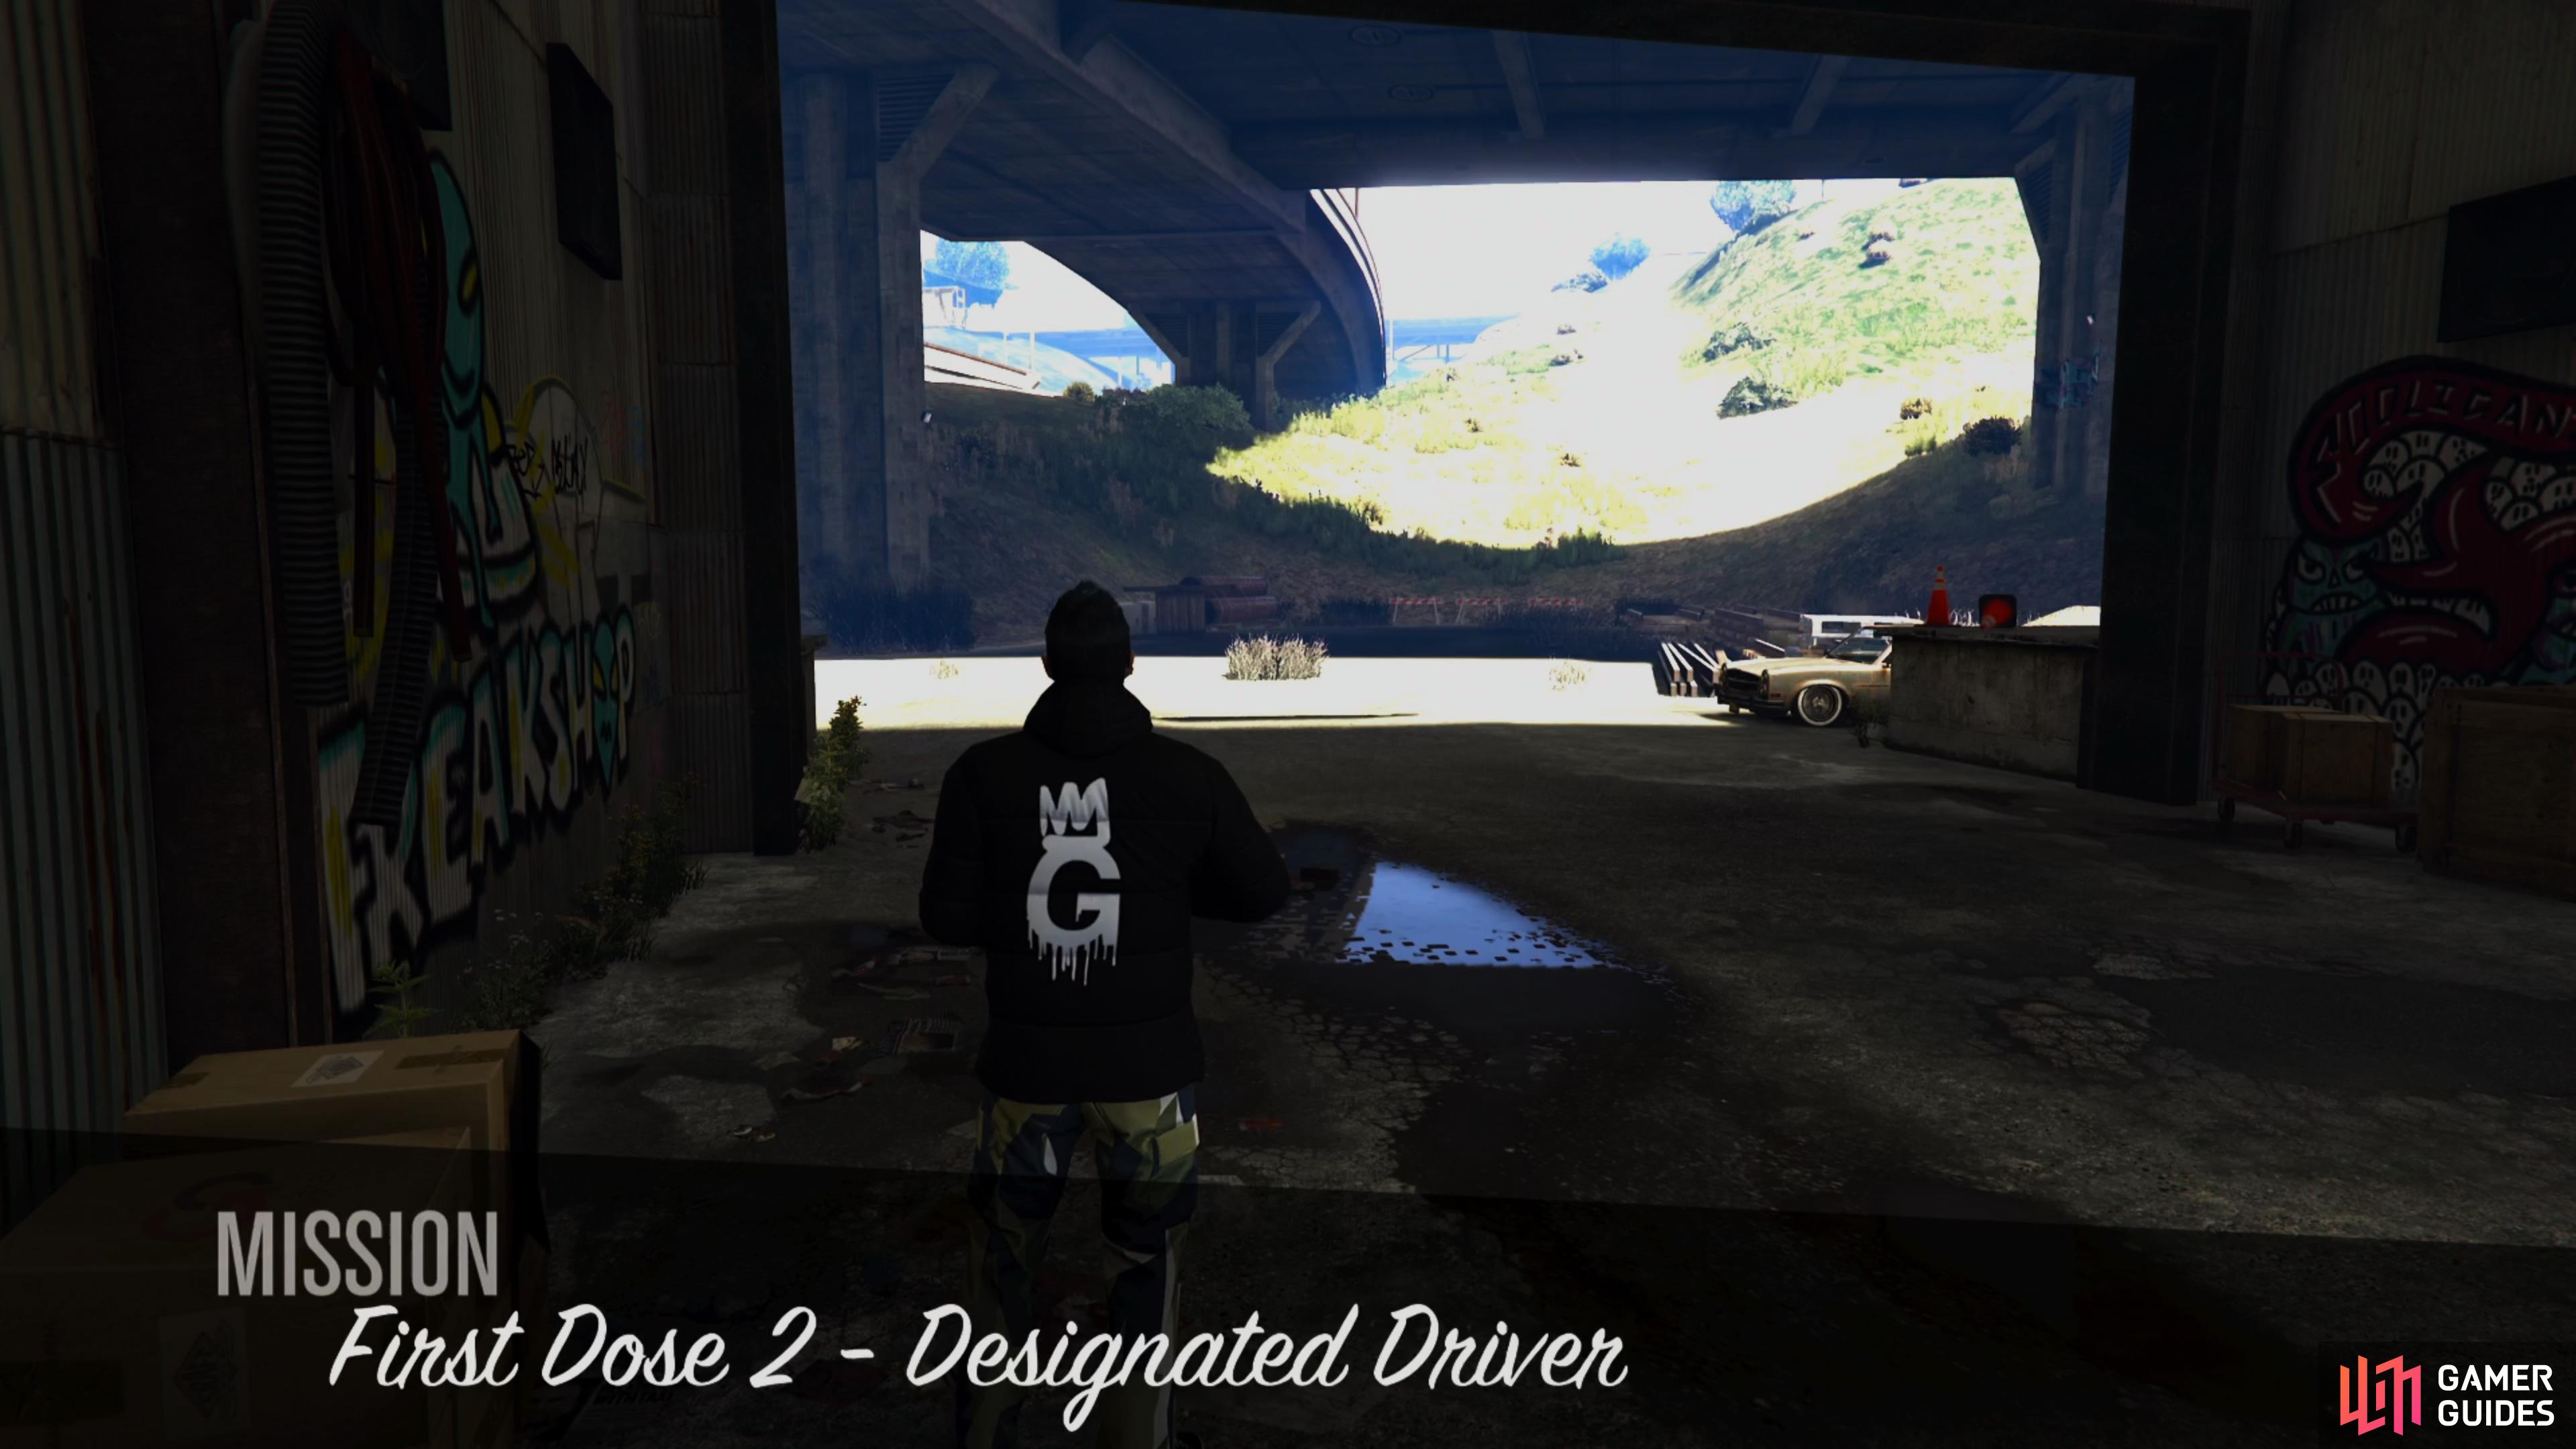 You can start the  Designated Driver Mission from the Abandoned Warehouse.